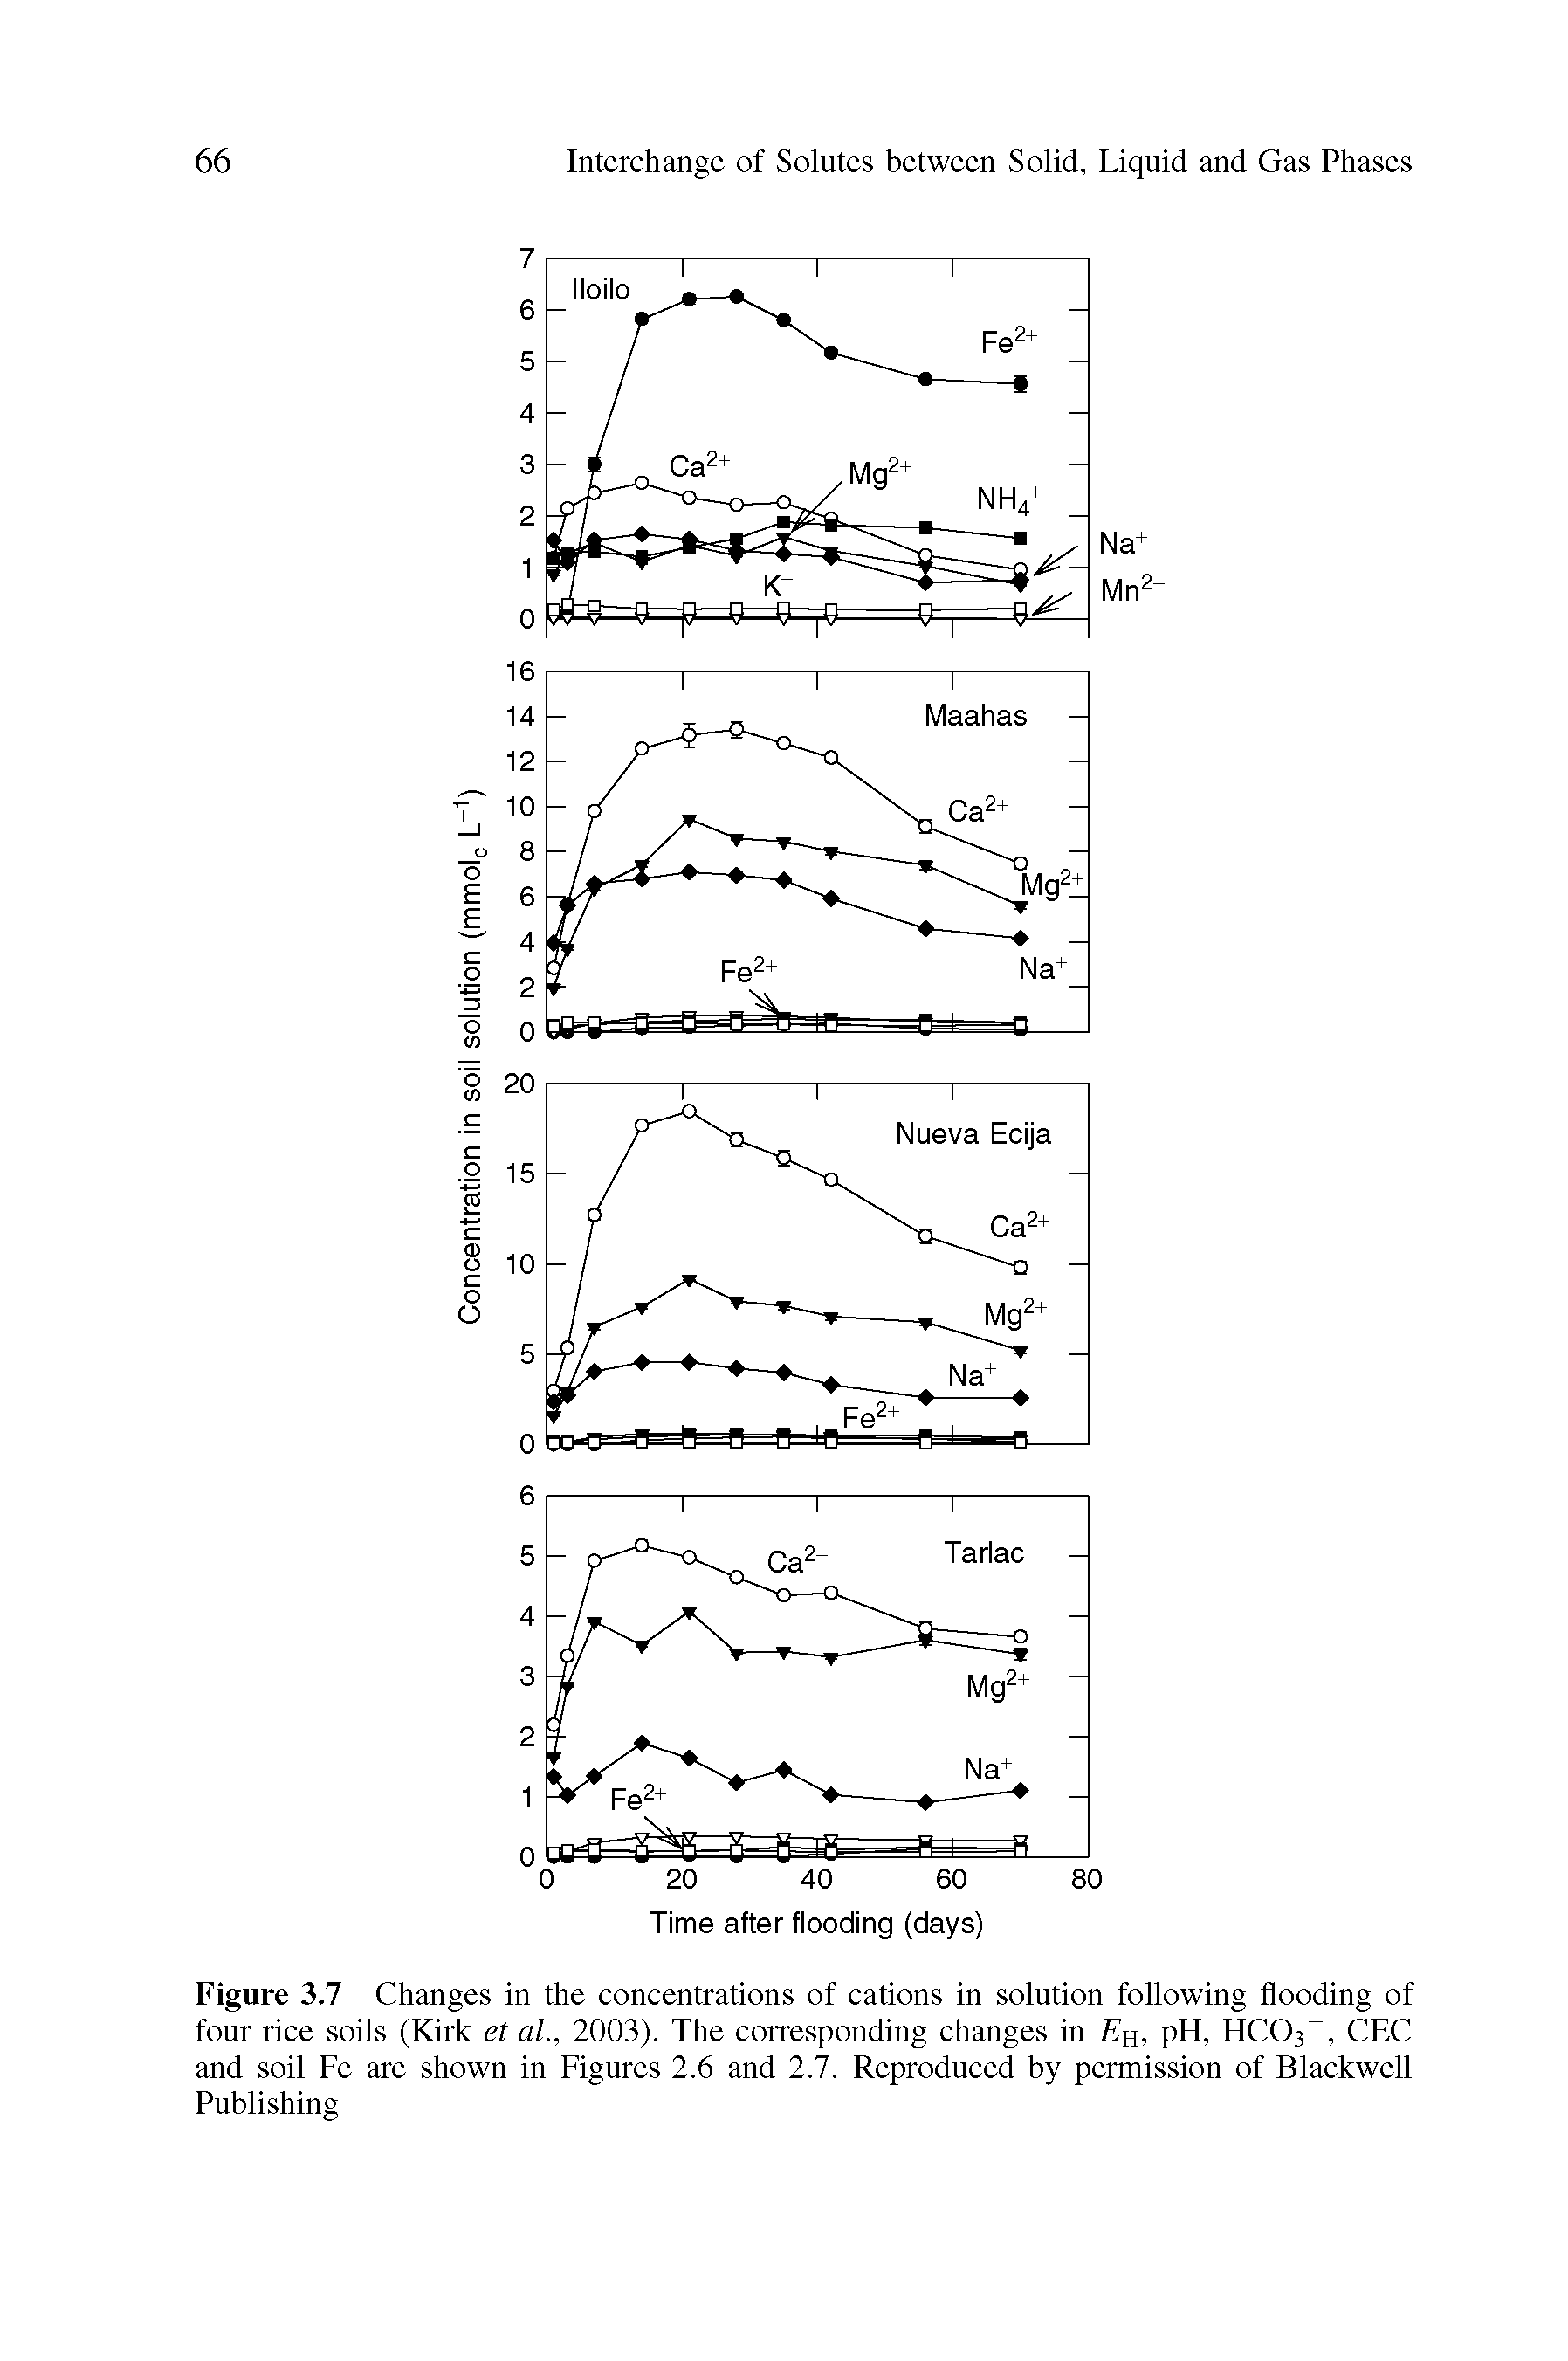 Figure 3.7 Changes in the concentrations of cations in solution following flooding of four rice soils (Kirk et al, 2003). The corresponding changes in E, pH, HCOs, CEC and soil Fe are shown in Figures 2.6 and 2.7. Reproduced by permission of Blackwell Publishing...